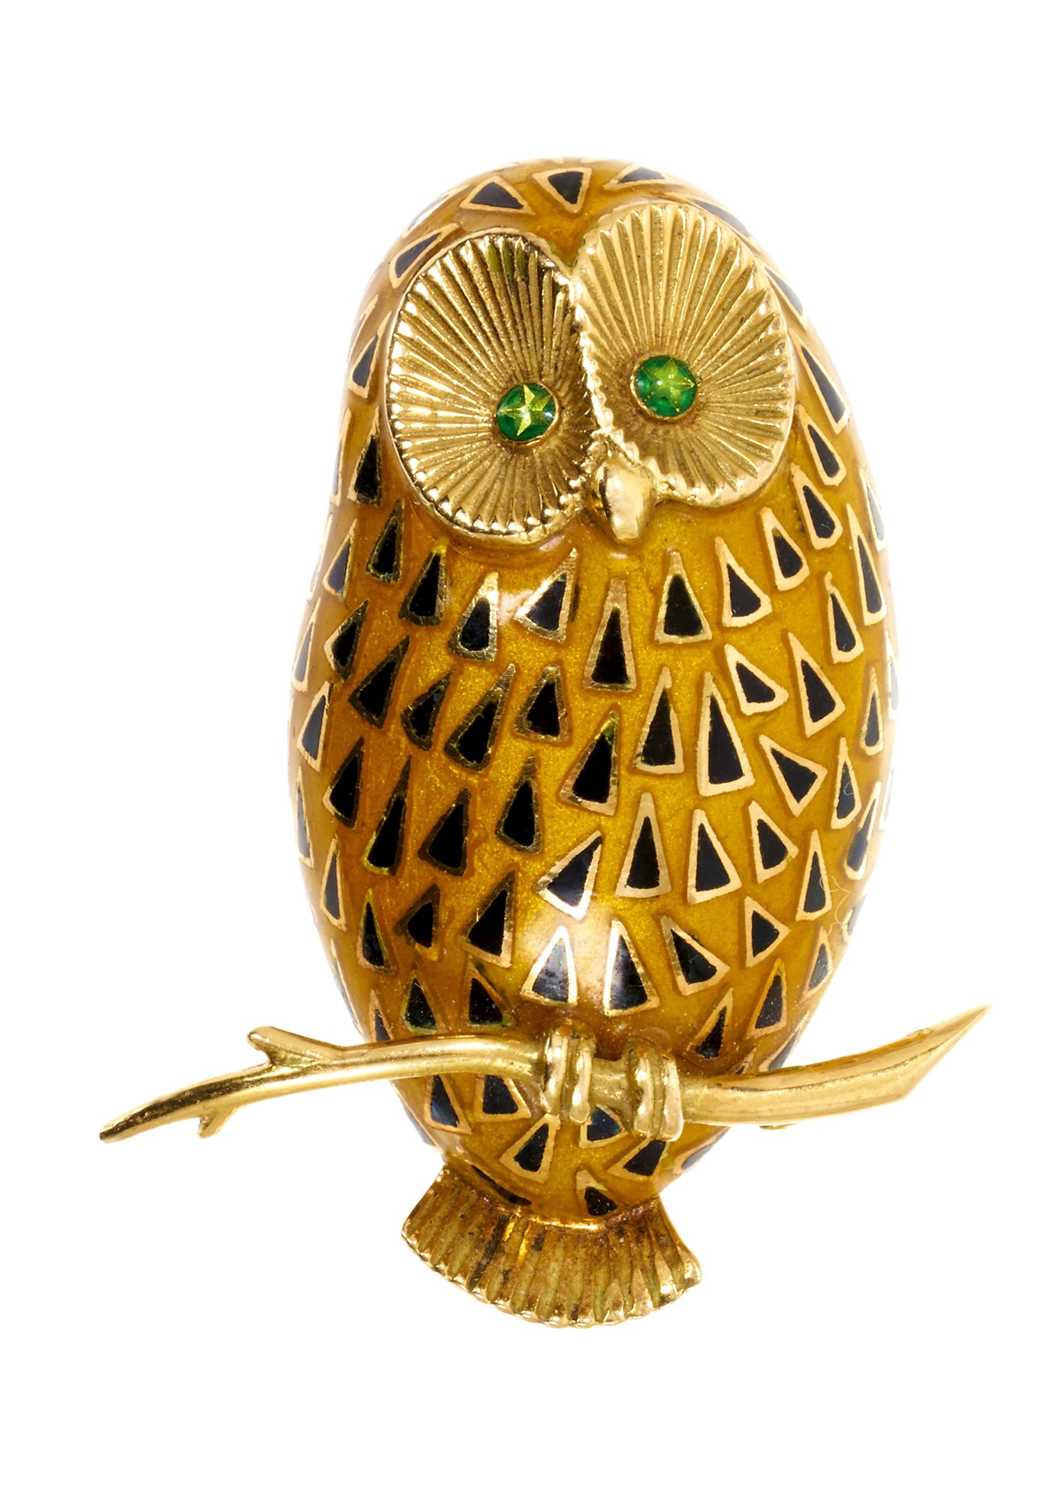 18ct gold and guilloché enamel novelty brooch in the form of an owl